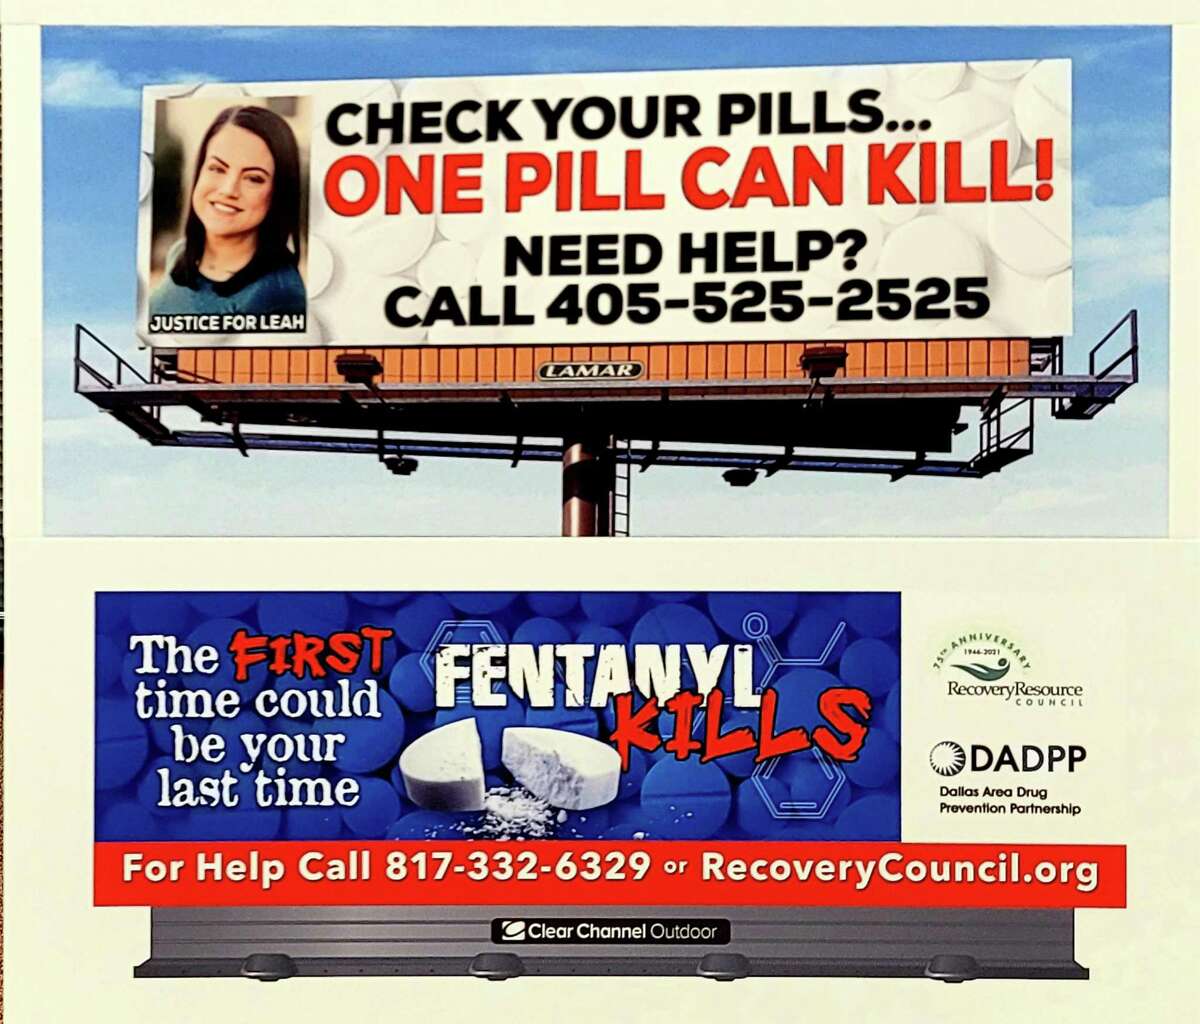 Examples of billboards that will be displayed around Houston as part of a campaign launched on Thursday, March 17 of 2022 to raise awareness about a dramatic increase in overdoses involving the synthetic opioid fentanyl in the area and Texas.